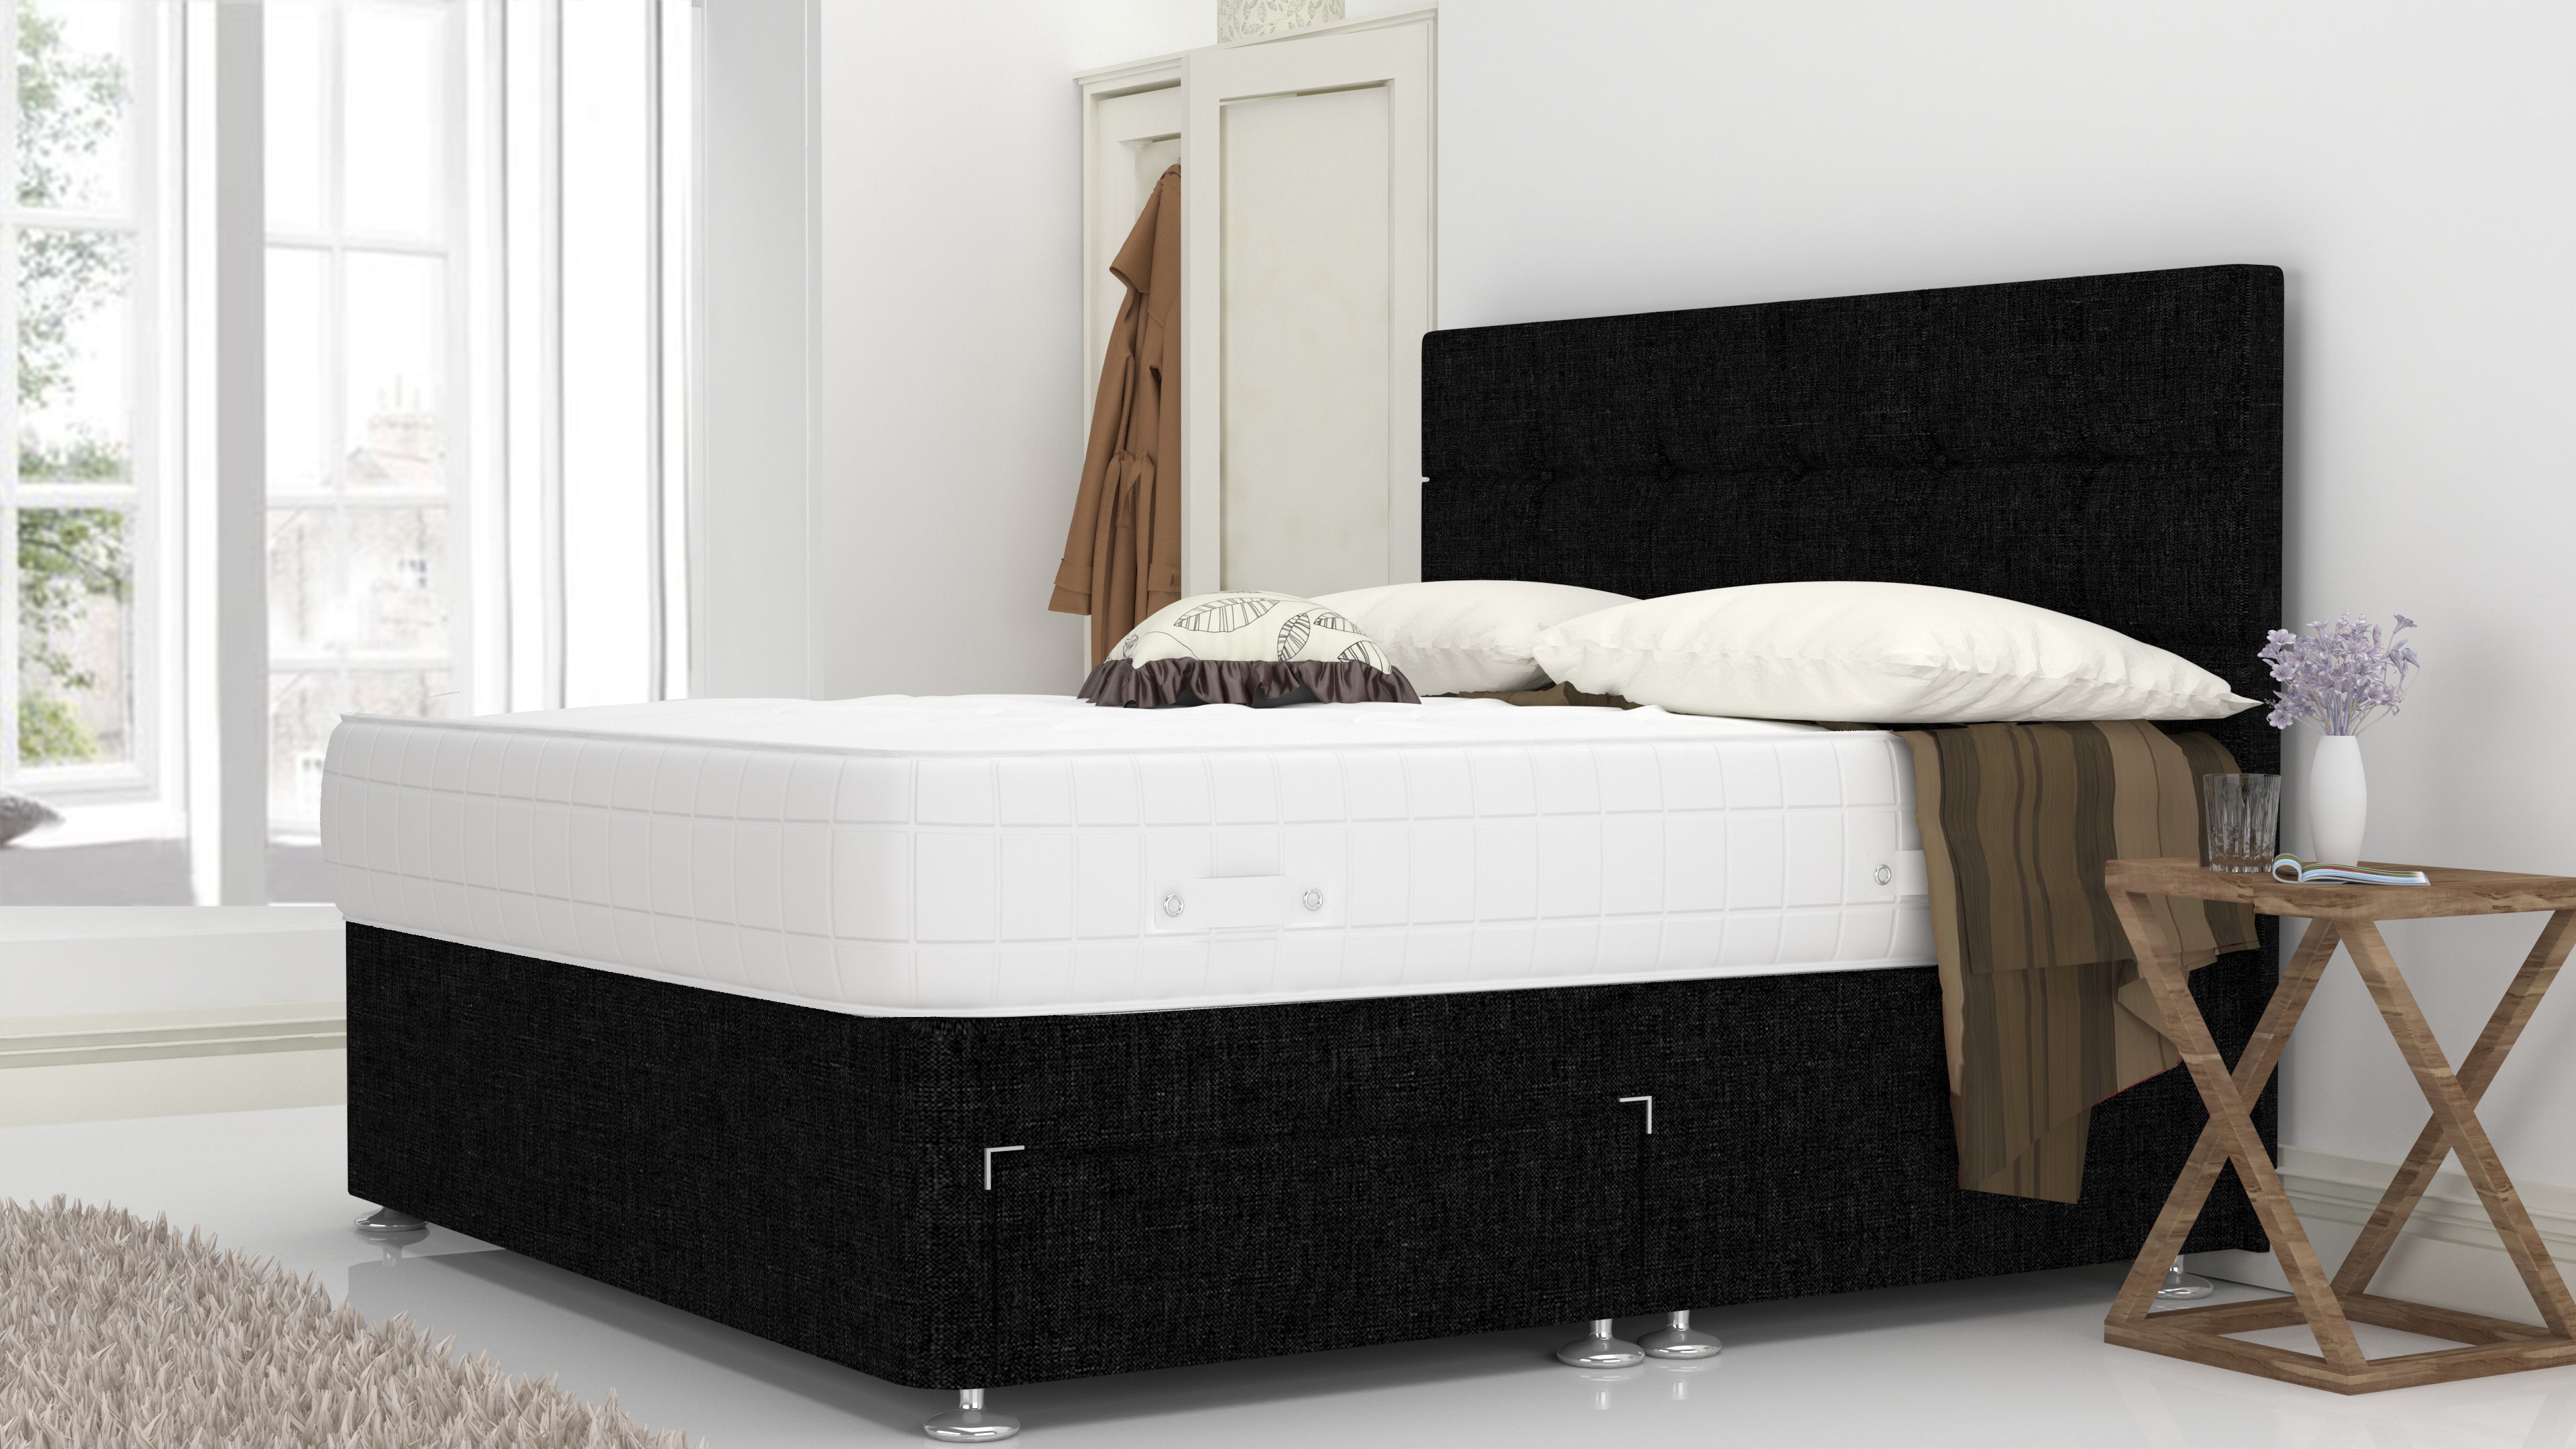 Black Venice 6 Feet Divan Bed Set With Cube Headboard (Included Feet) And Free Orthopedic Mattress.